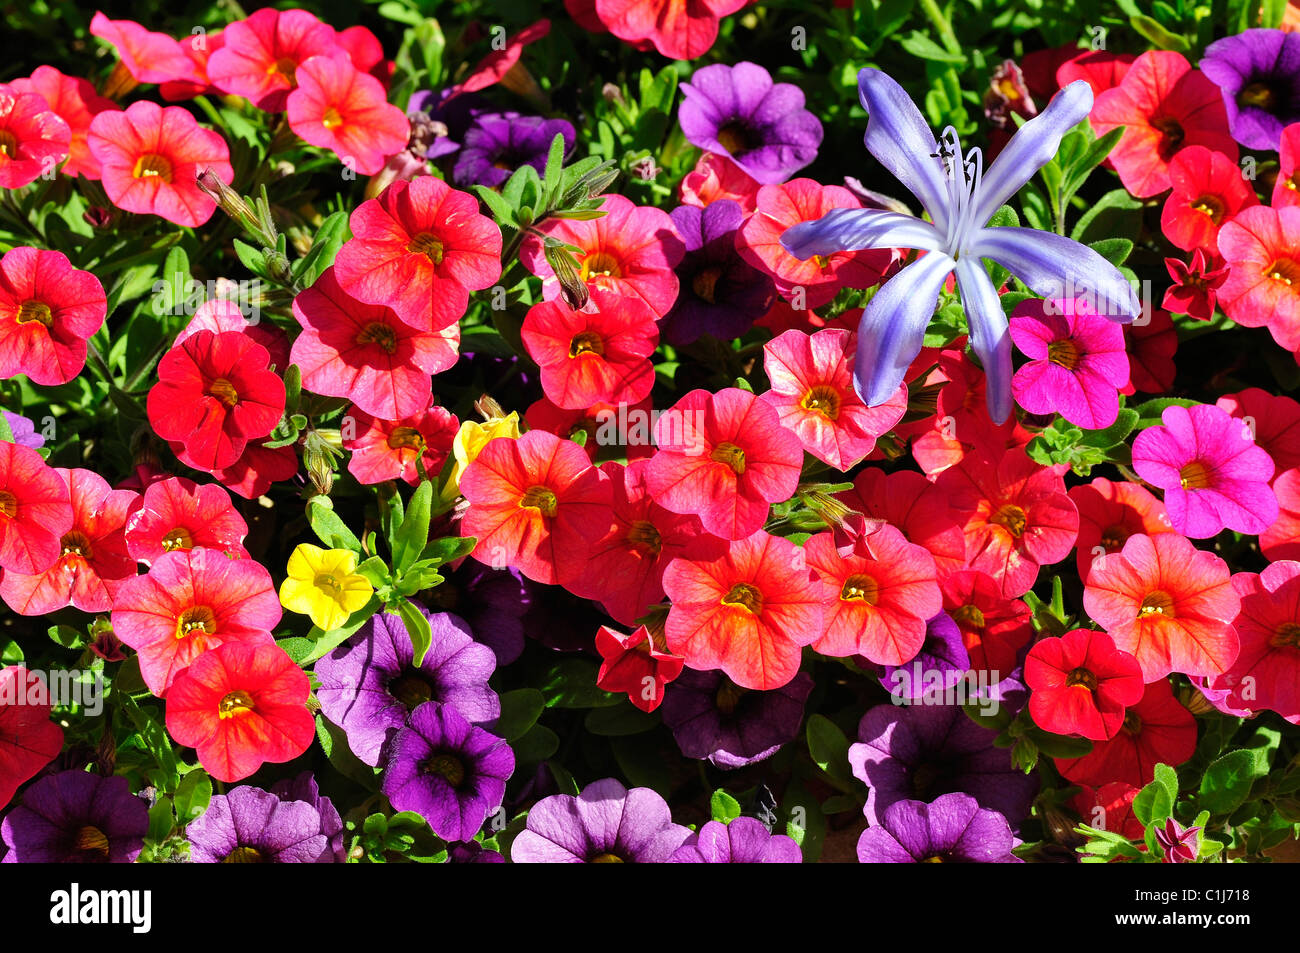 Flowering red Petunia Dwarf with blue agapanthus flower Stock Photo